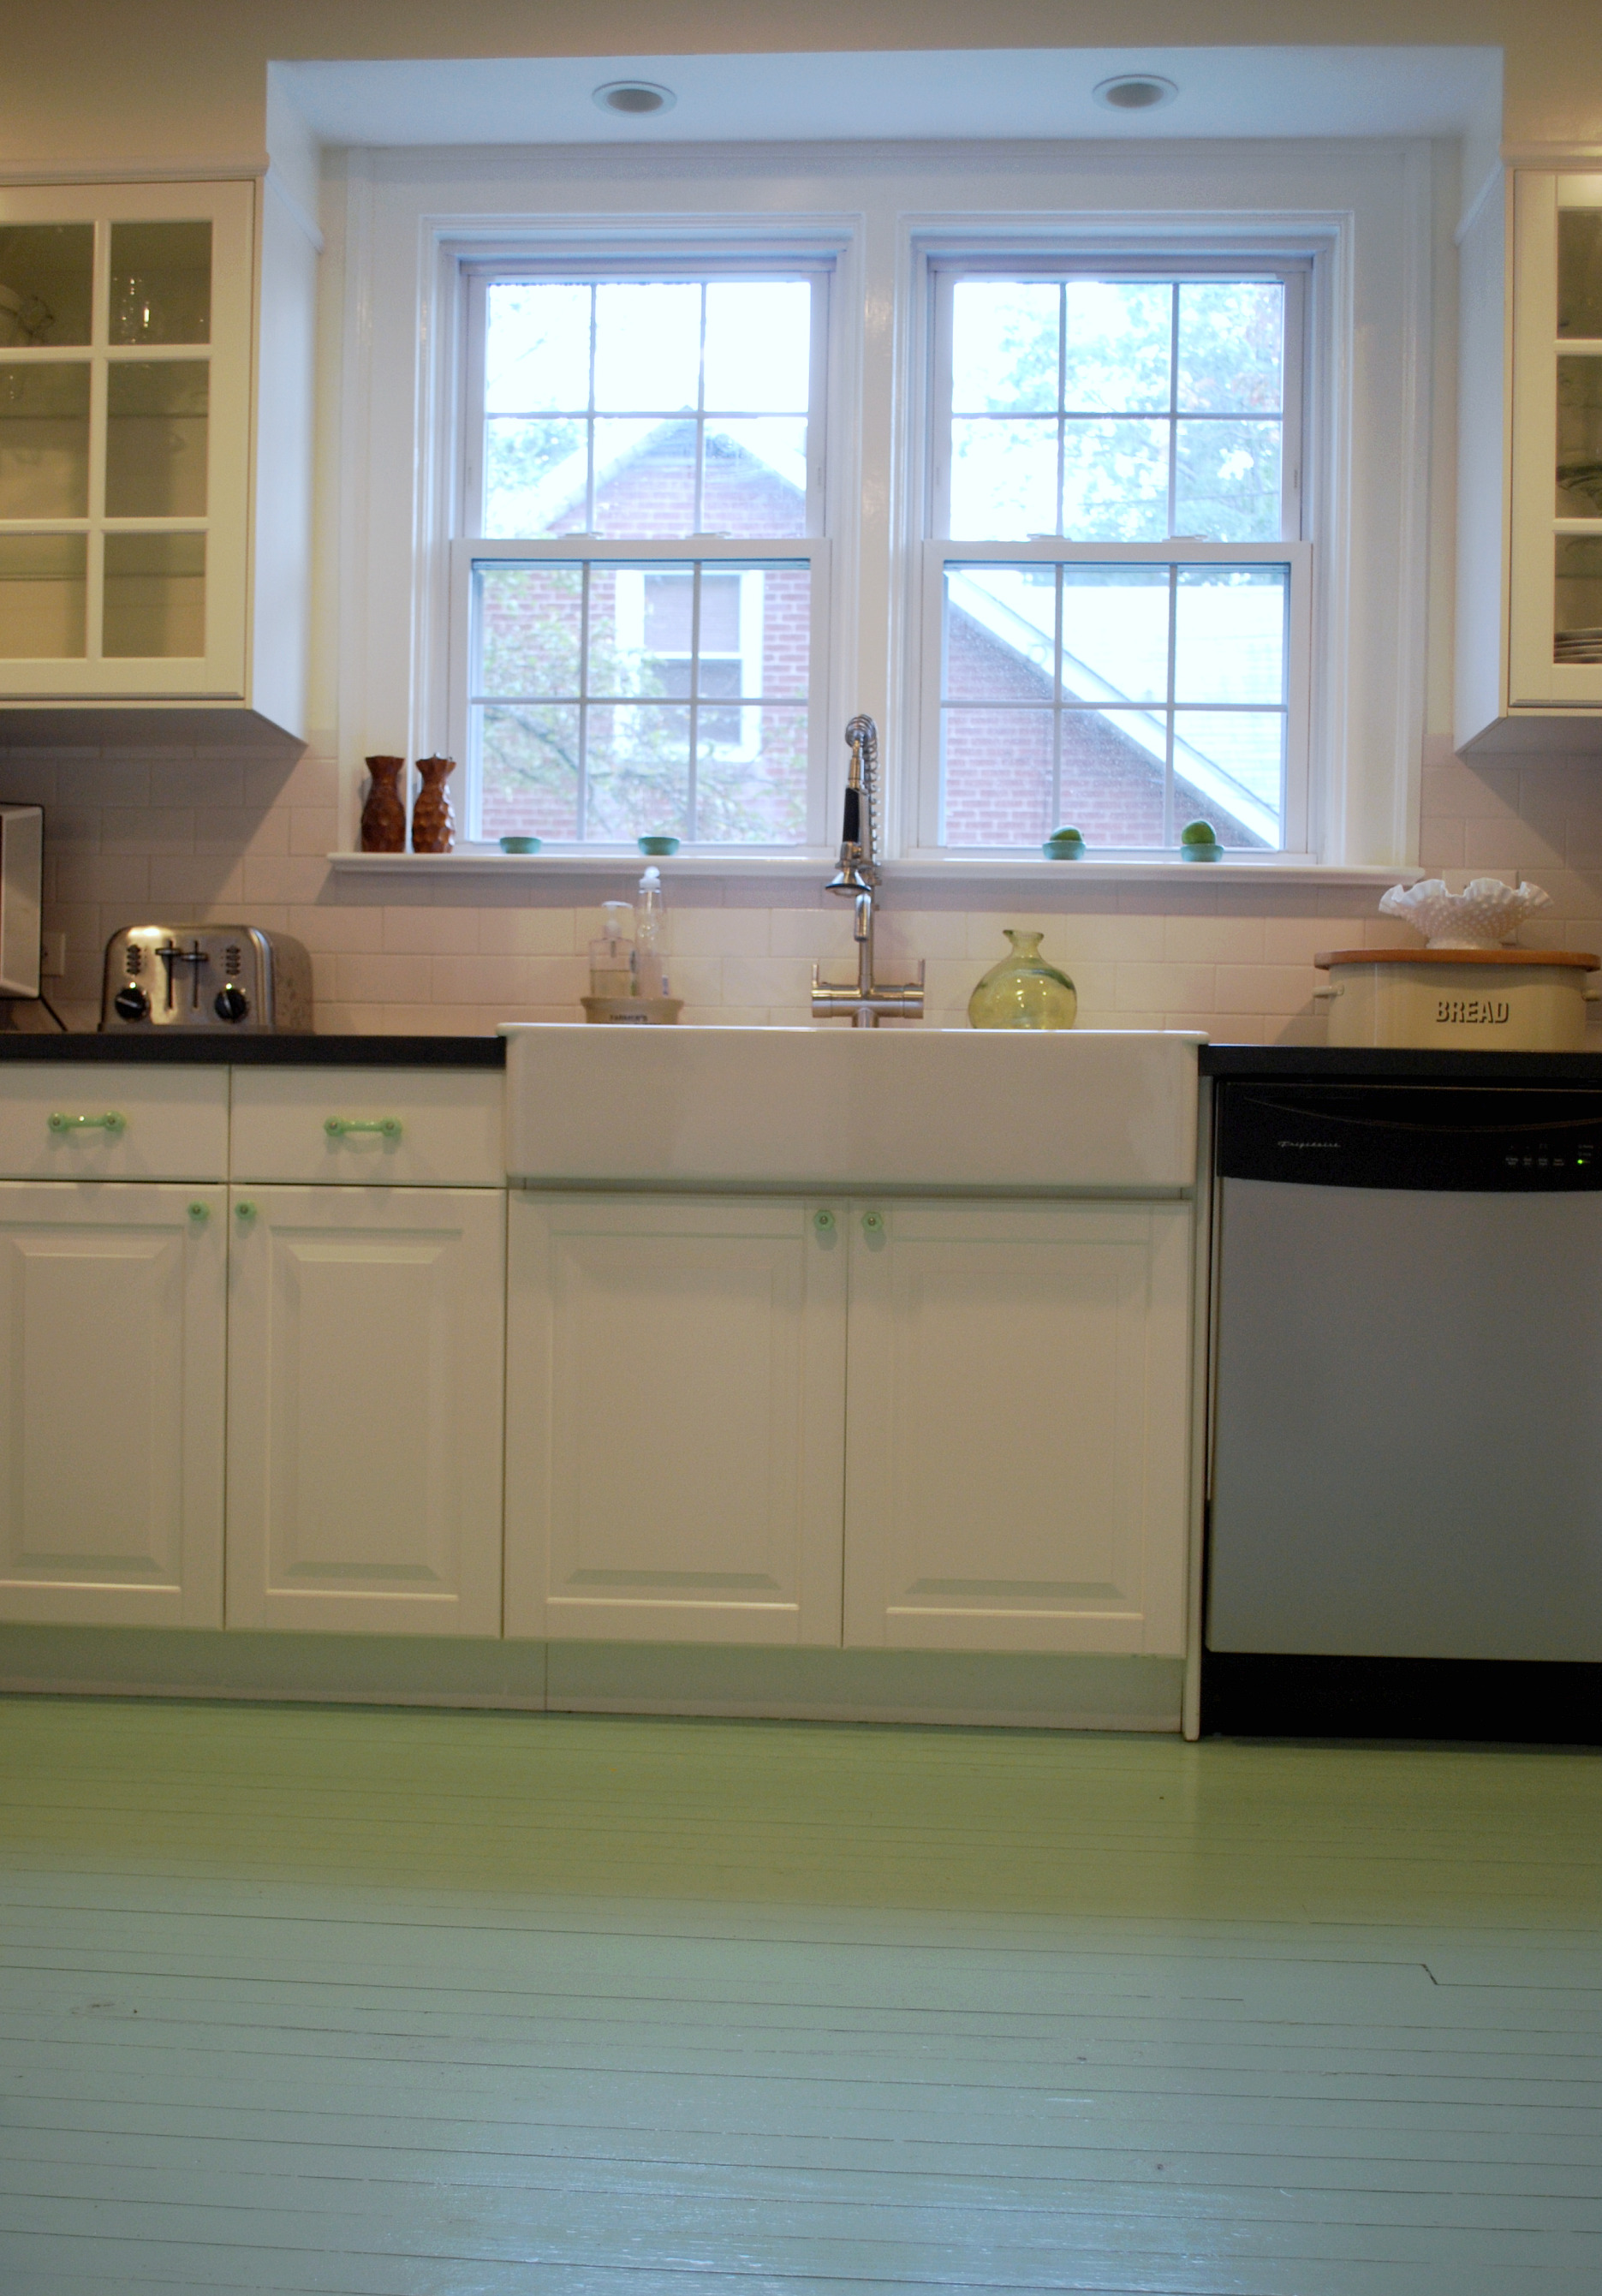 Light It Up Showit Blog, How To Install Recessed Lighting Over Kitchen Sink